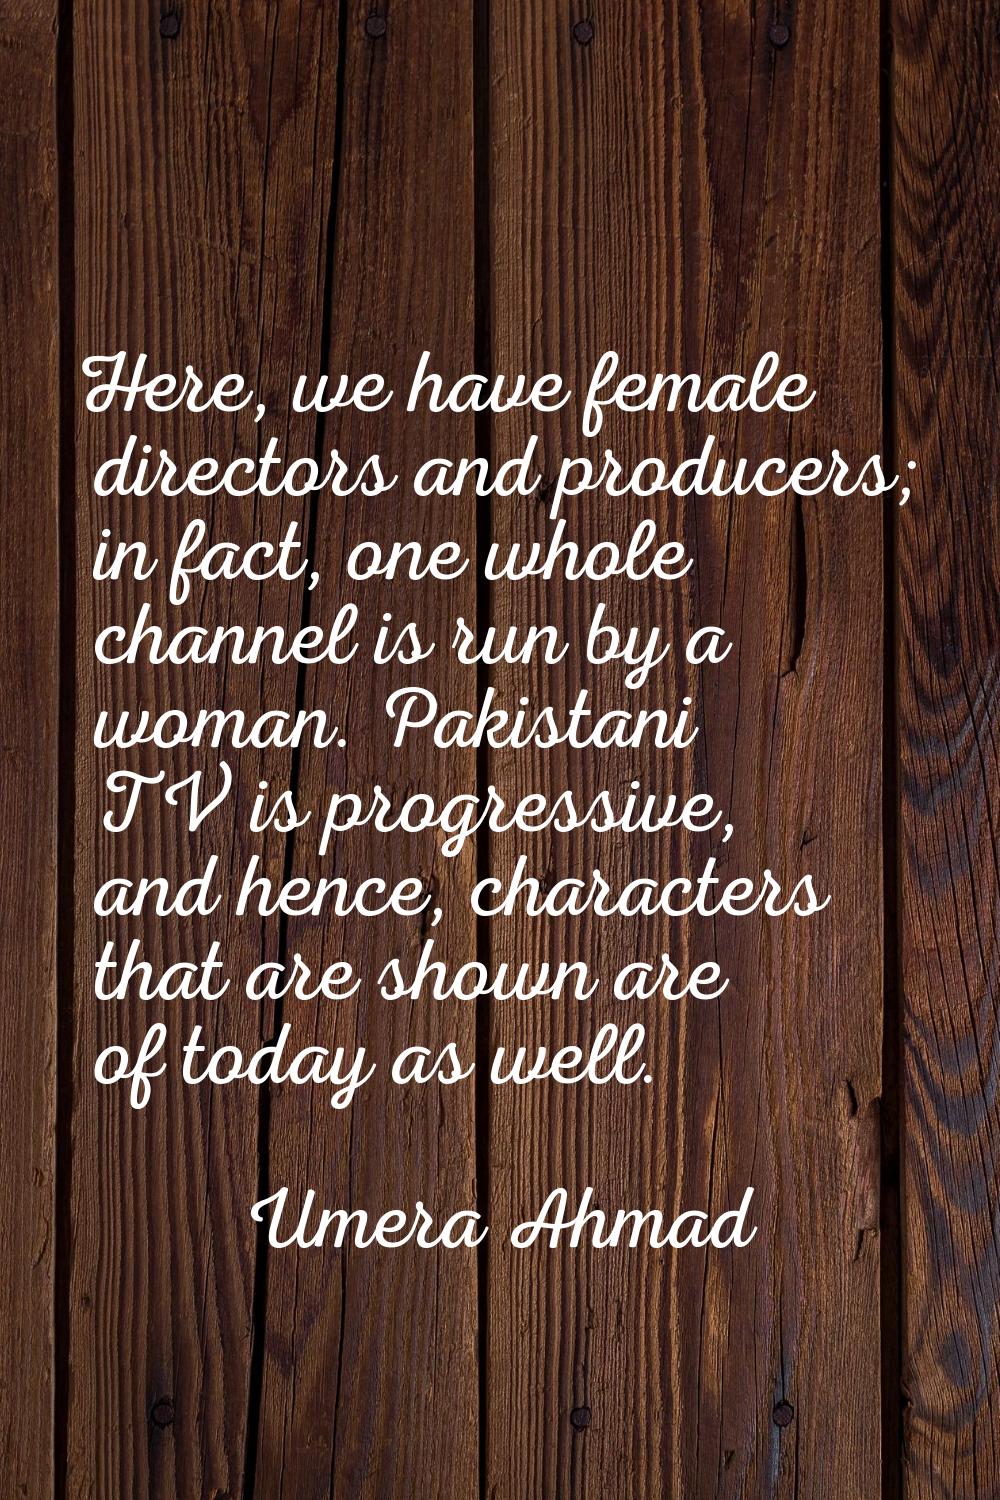 Here, we have female directors and producers; in fact, one whole channel is run by a woman. Pakista